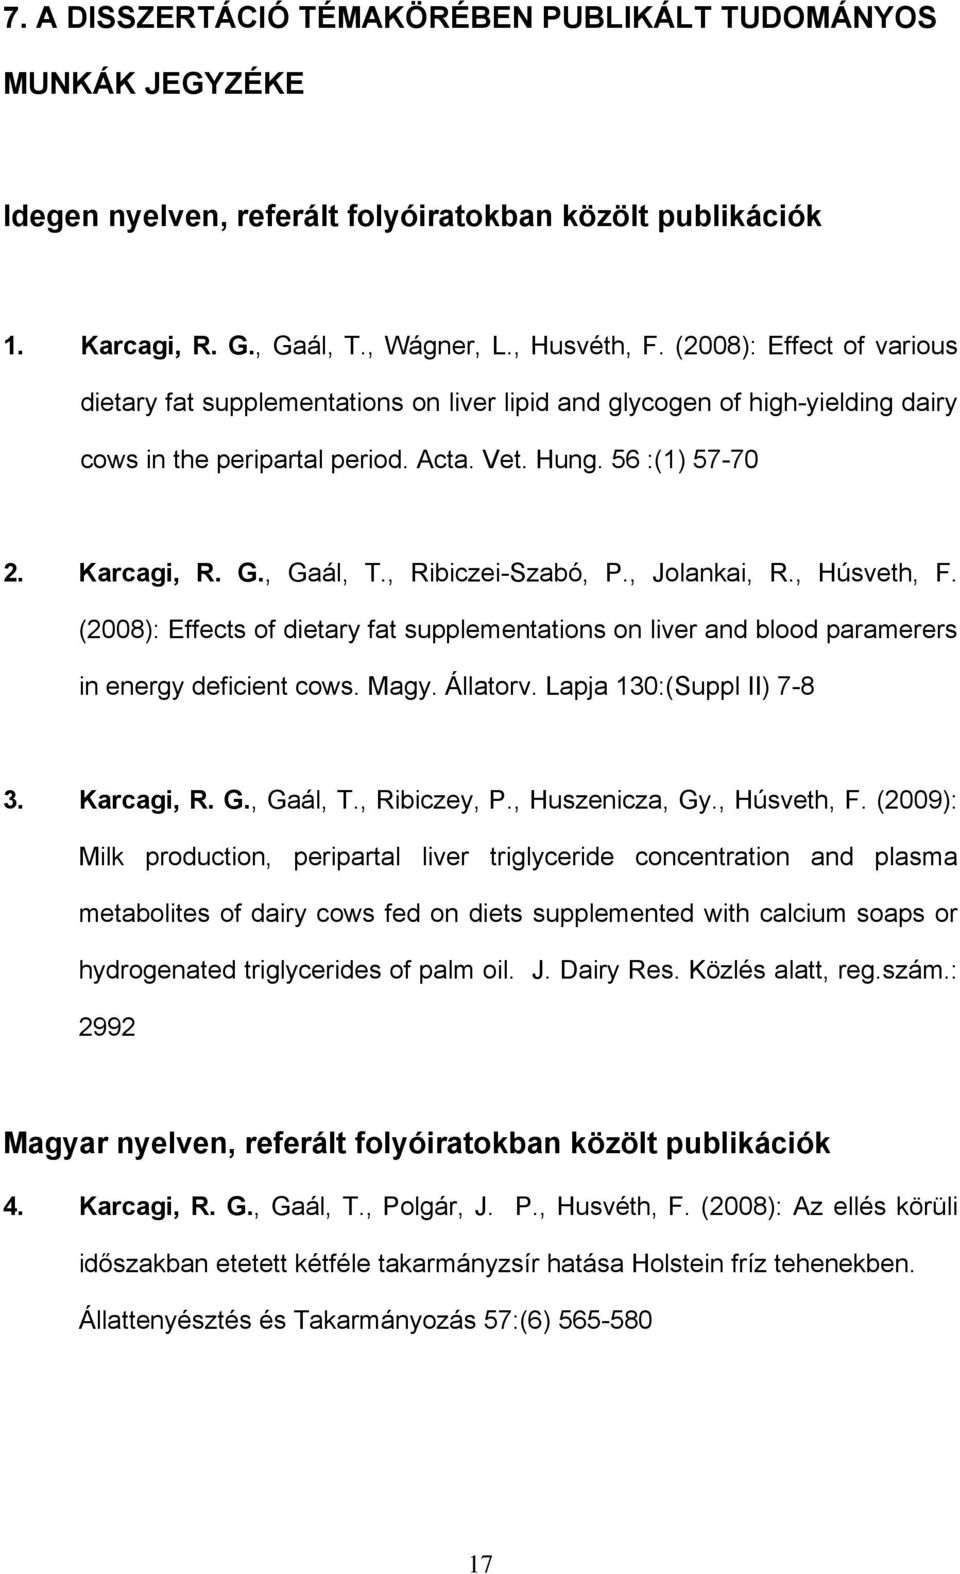 , Ribiczei-Szabó, P., Jolankai, R., Húsveth, F. (2008): Effects of dietary fat supplementations on liver and blood paramerers in energy deficient cows. Magy. Állatorv. Lapja 130:(Suppl II) 7-8 3.